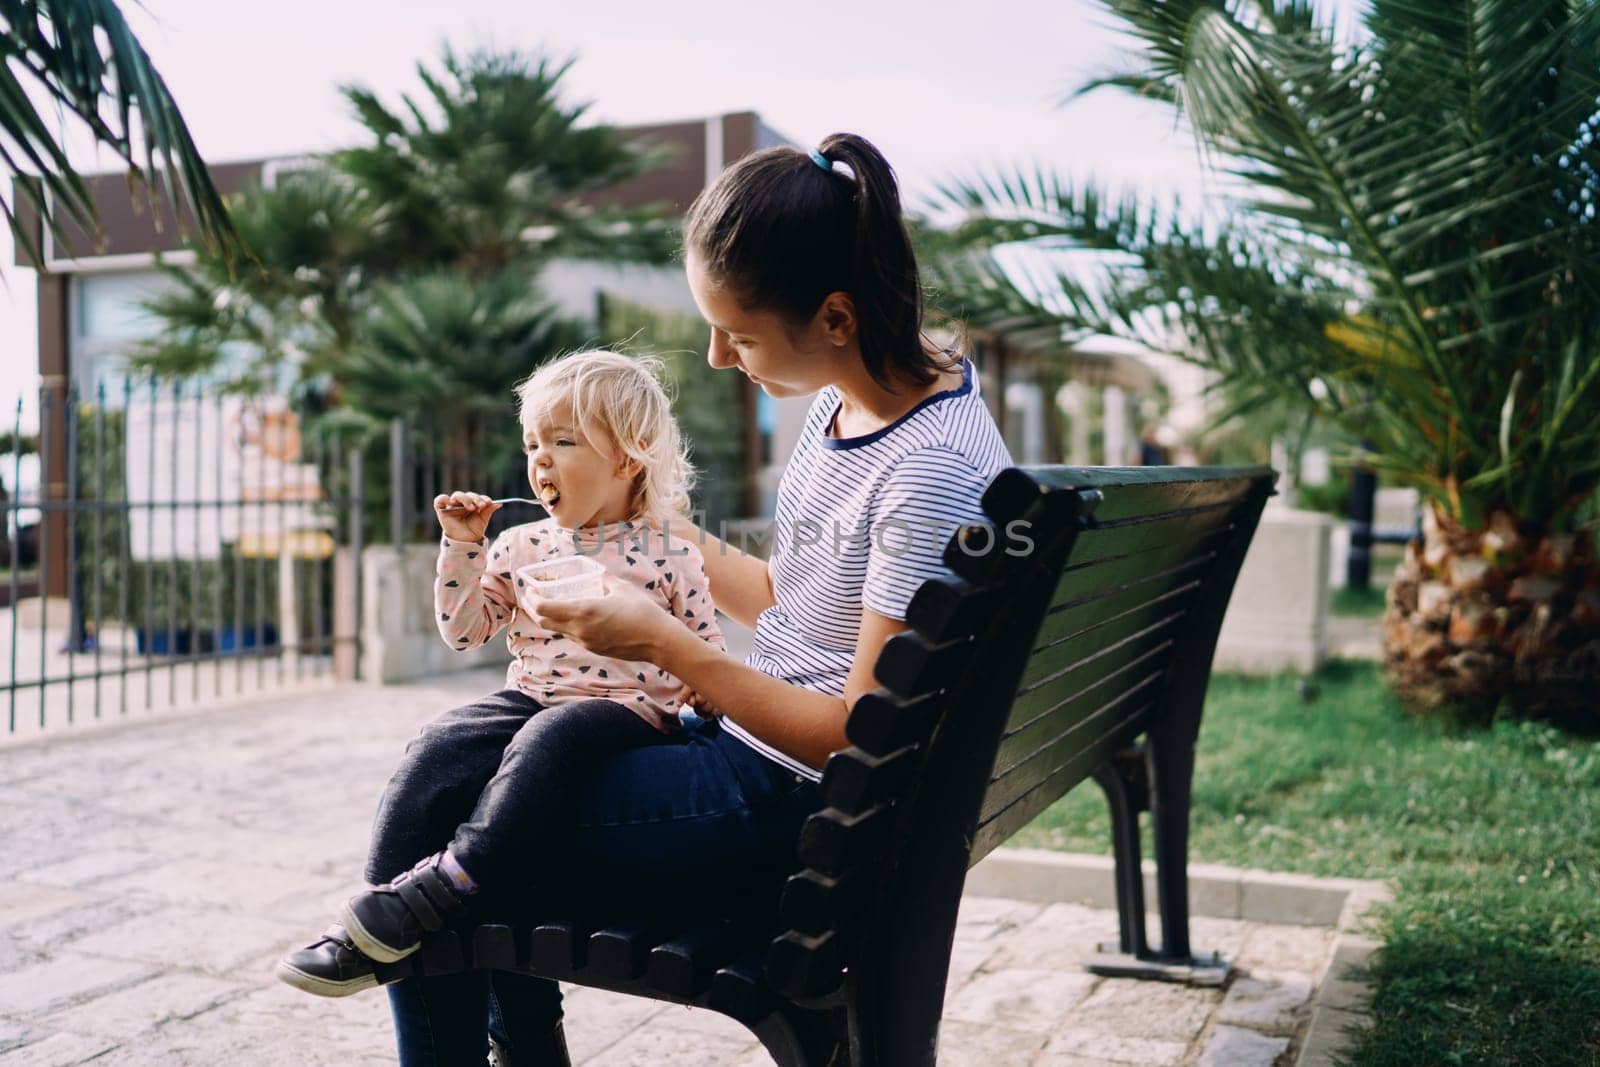 Little girl with a spoon eats porridge from a lunchbox in the hands of her mom sitting on a bench. High quality photo